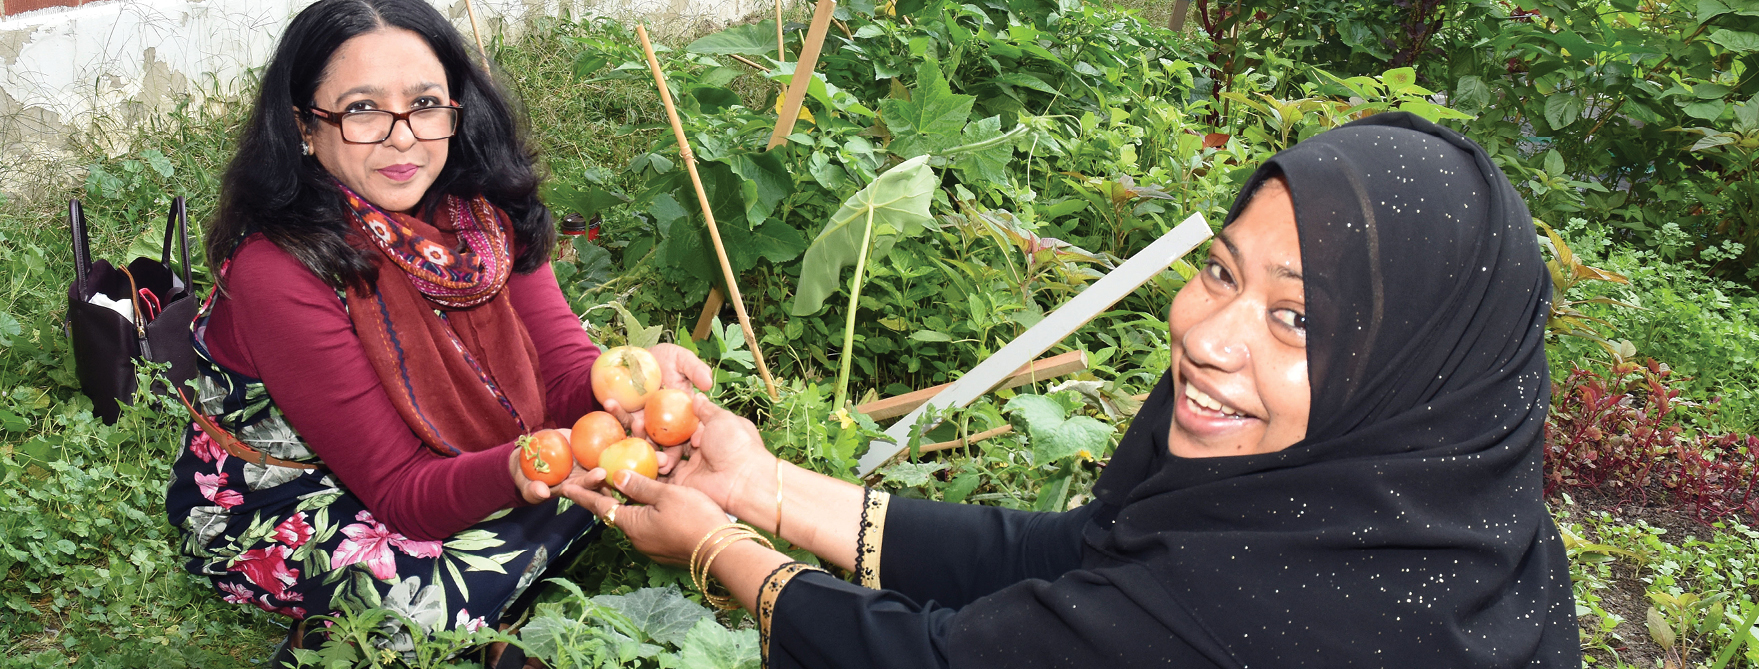 two women helping each other in the Community Garden